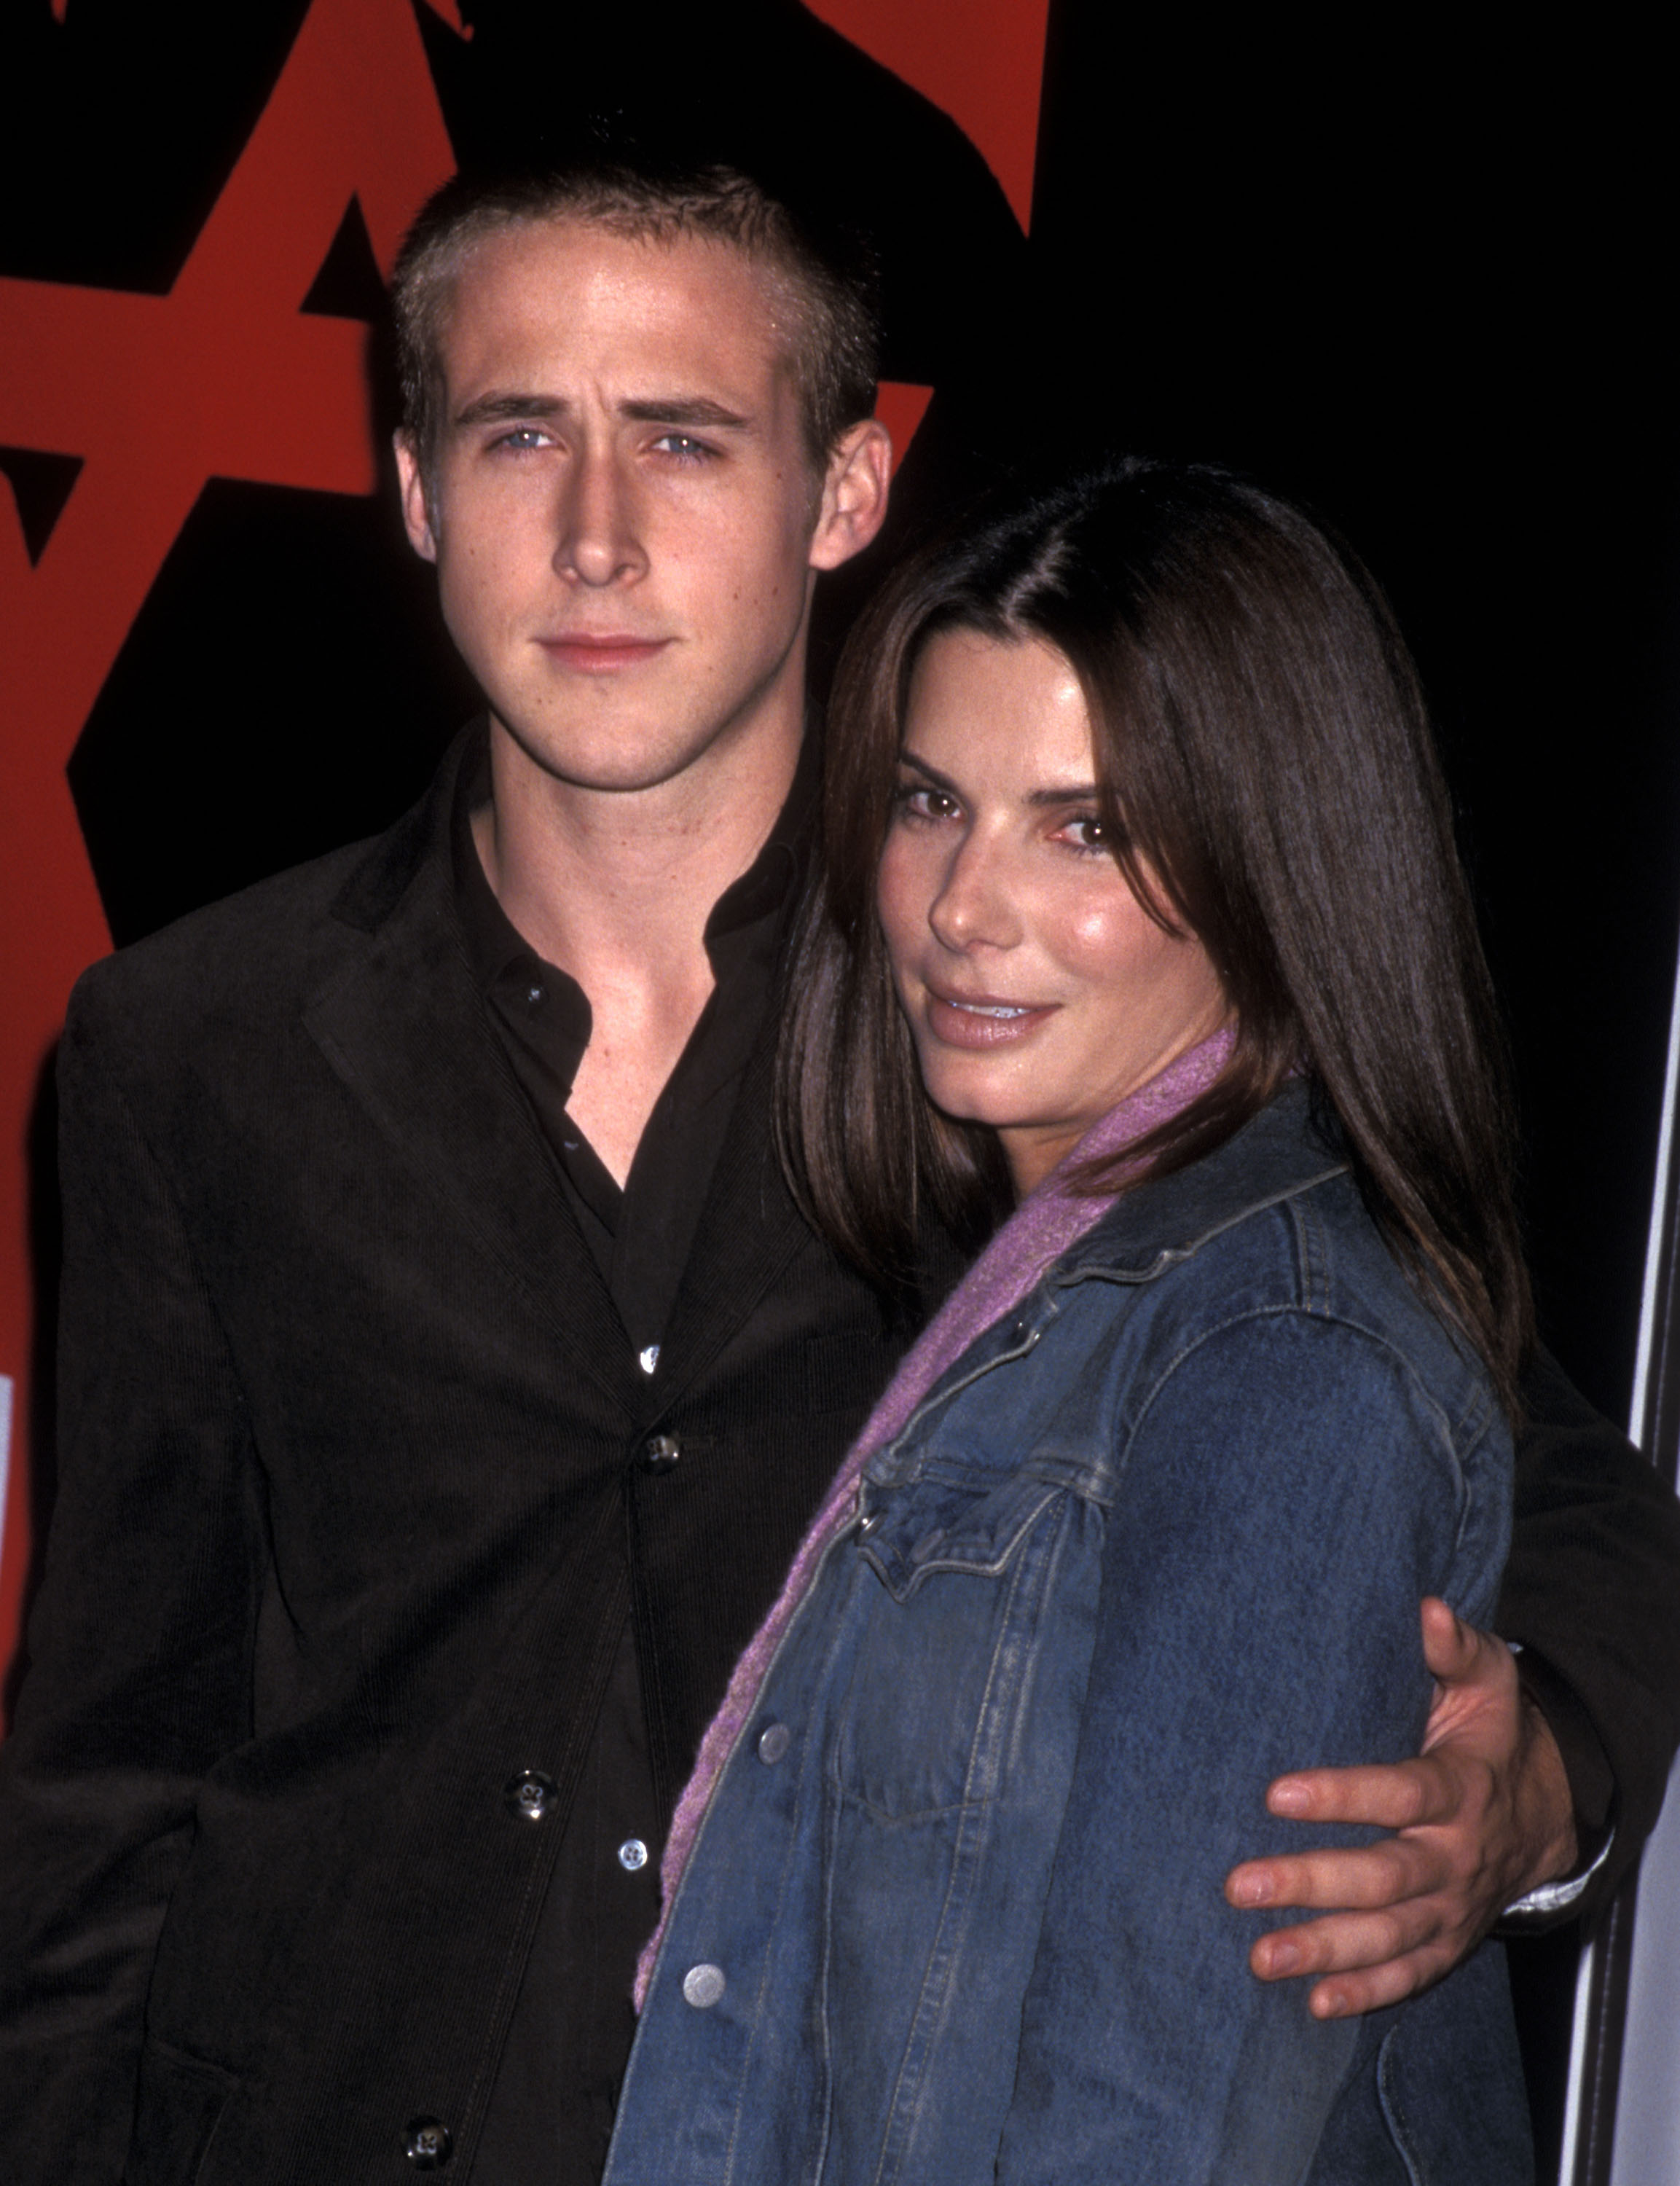 In a shirt with his arm around Sandra Bullock at a media event